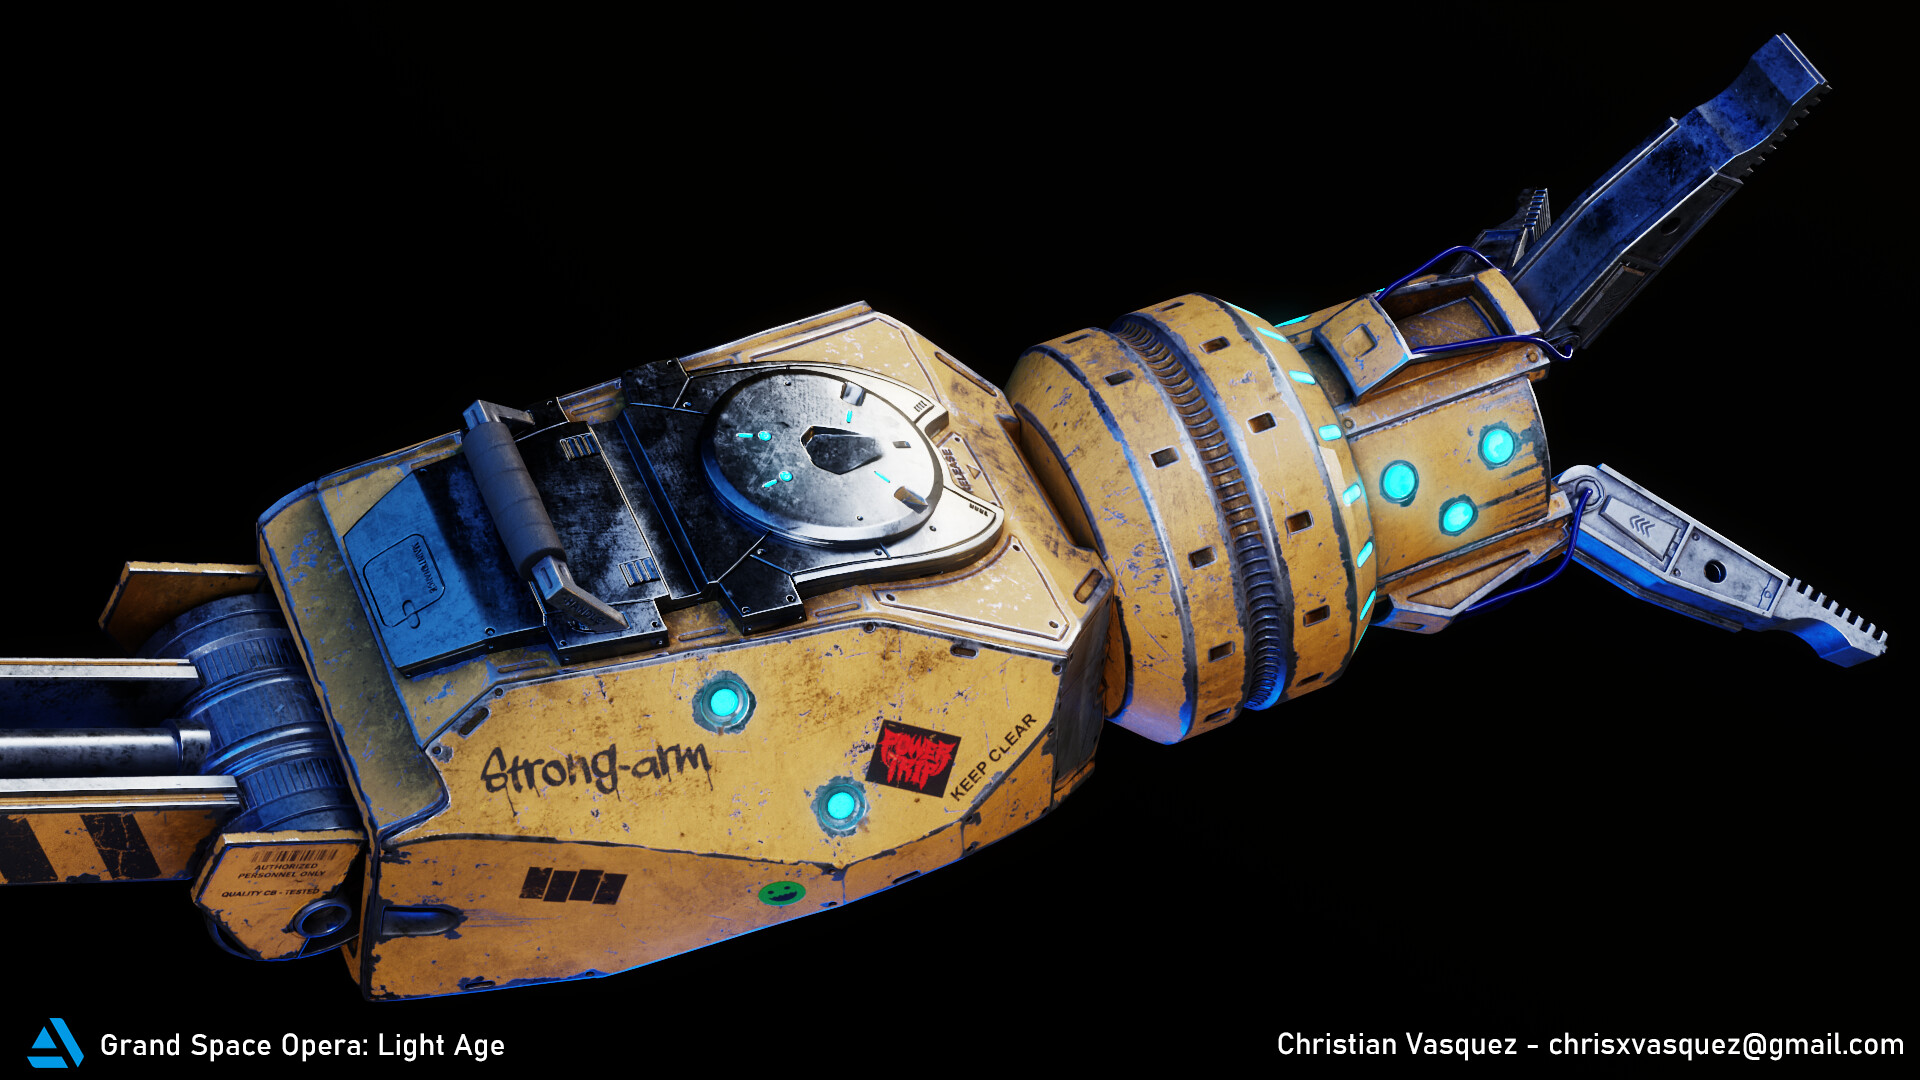 Art of Christian Vasquez - Strong-arm: Grand Space Opera